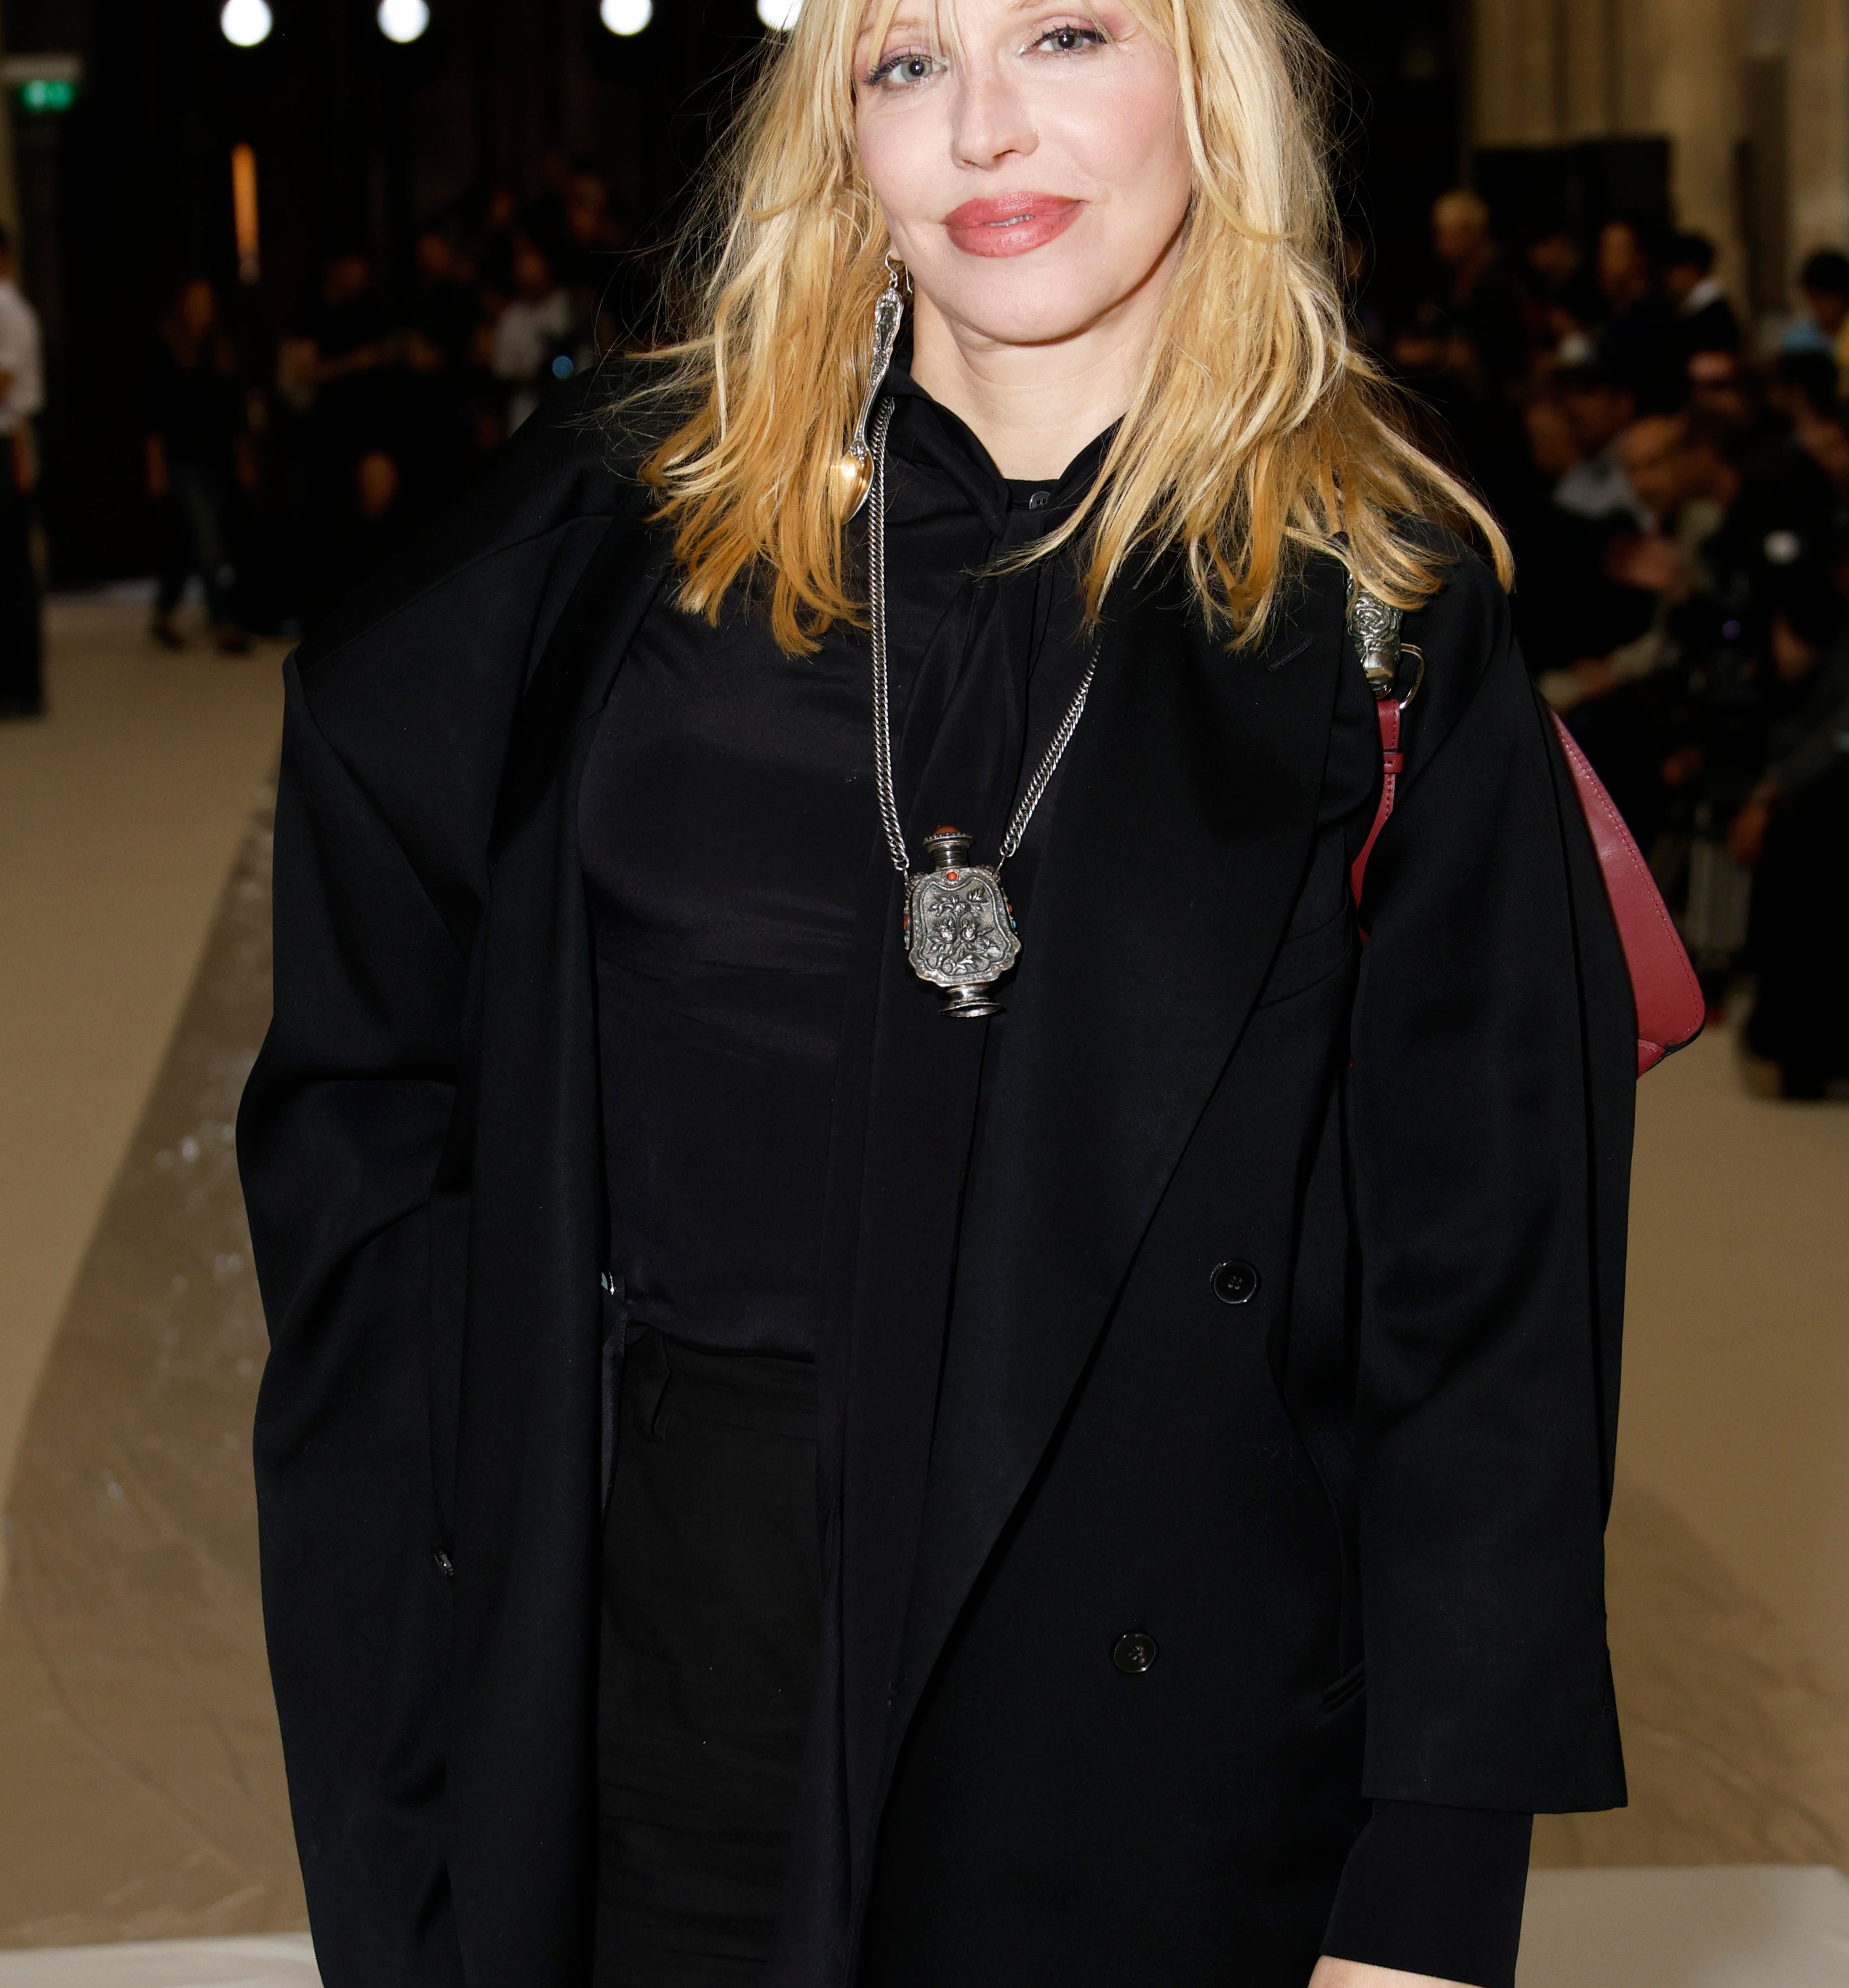 Courtney Love at an event wearing a blazer with a silver pendant